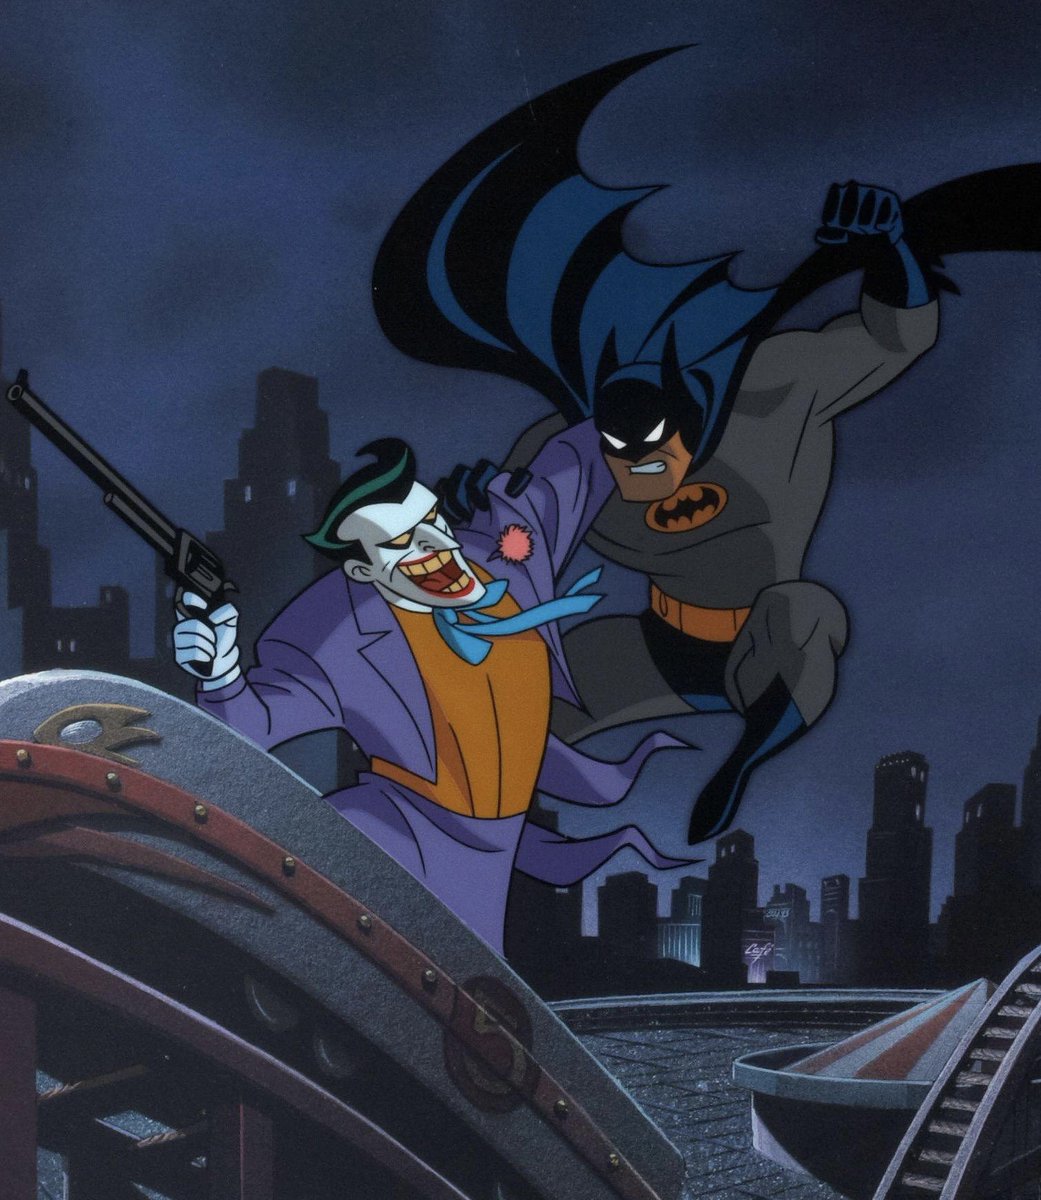 Kevin Conroy and Mark Hamill will reunite as Batman and The Joker for one final project, ‘CRISIS ON INFINITE EARTHS: PART 3’.